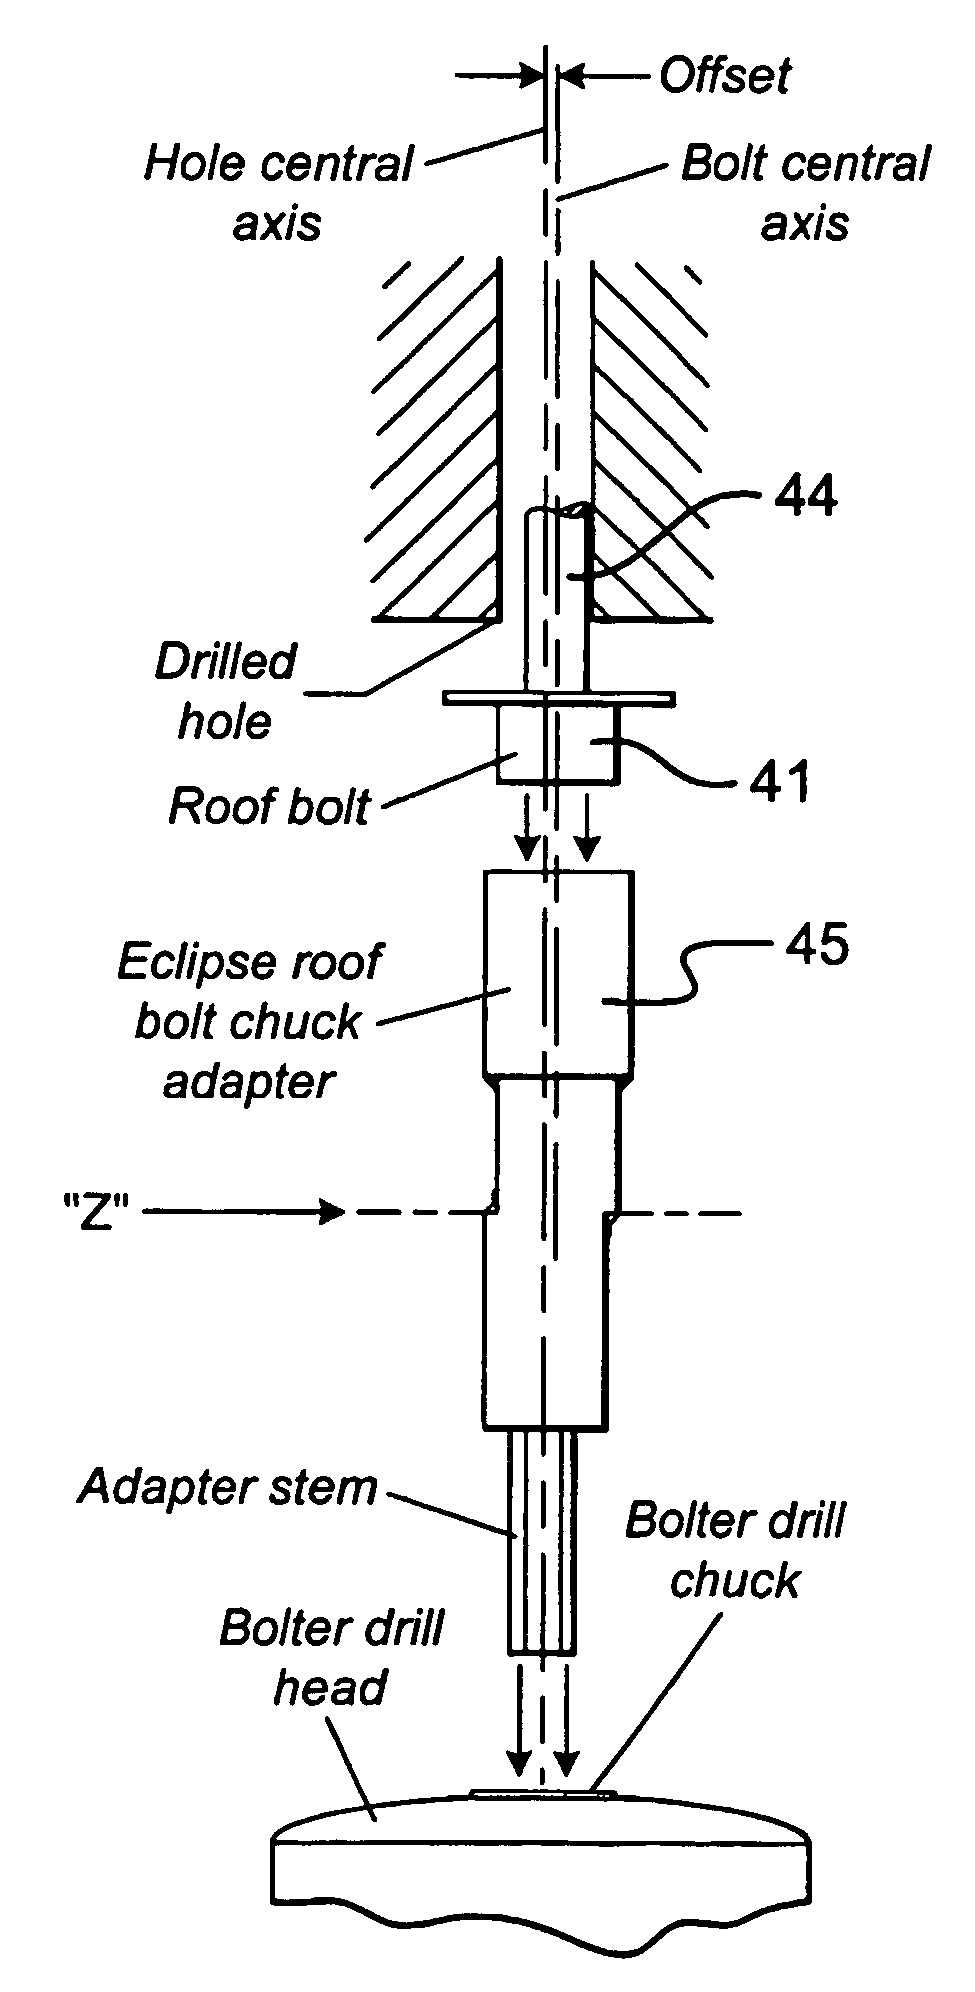 Schematic Diagram of Roof Bolt